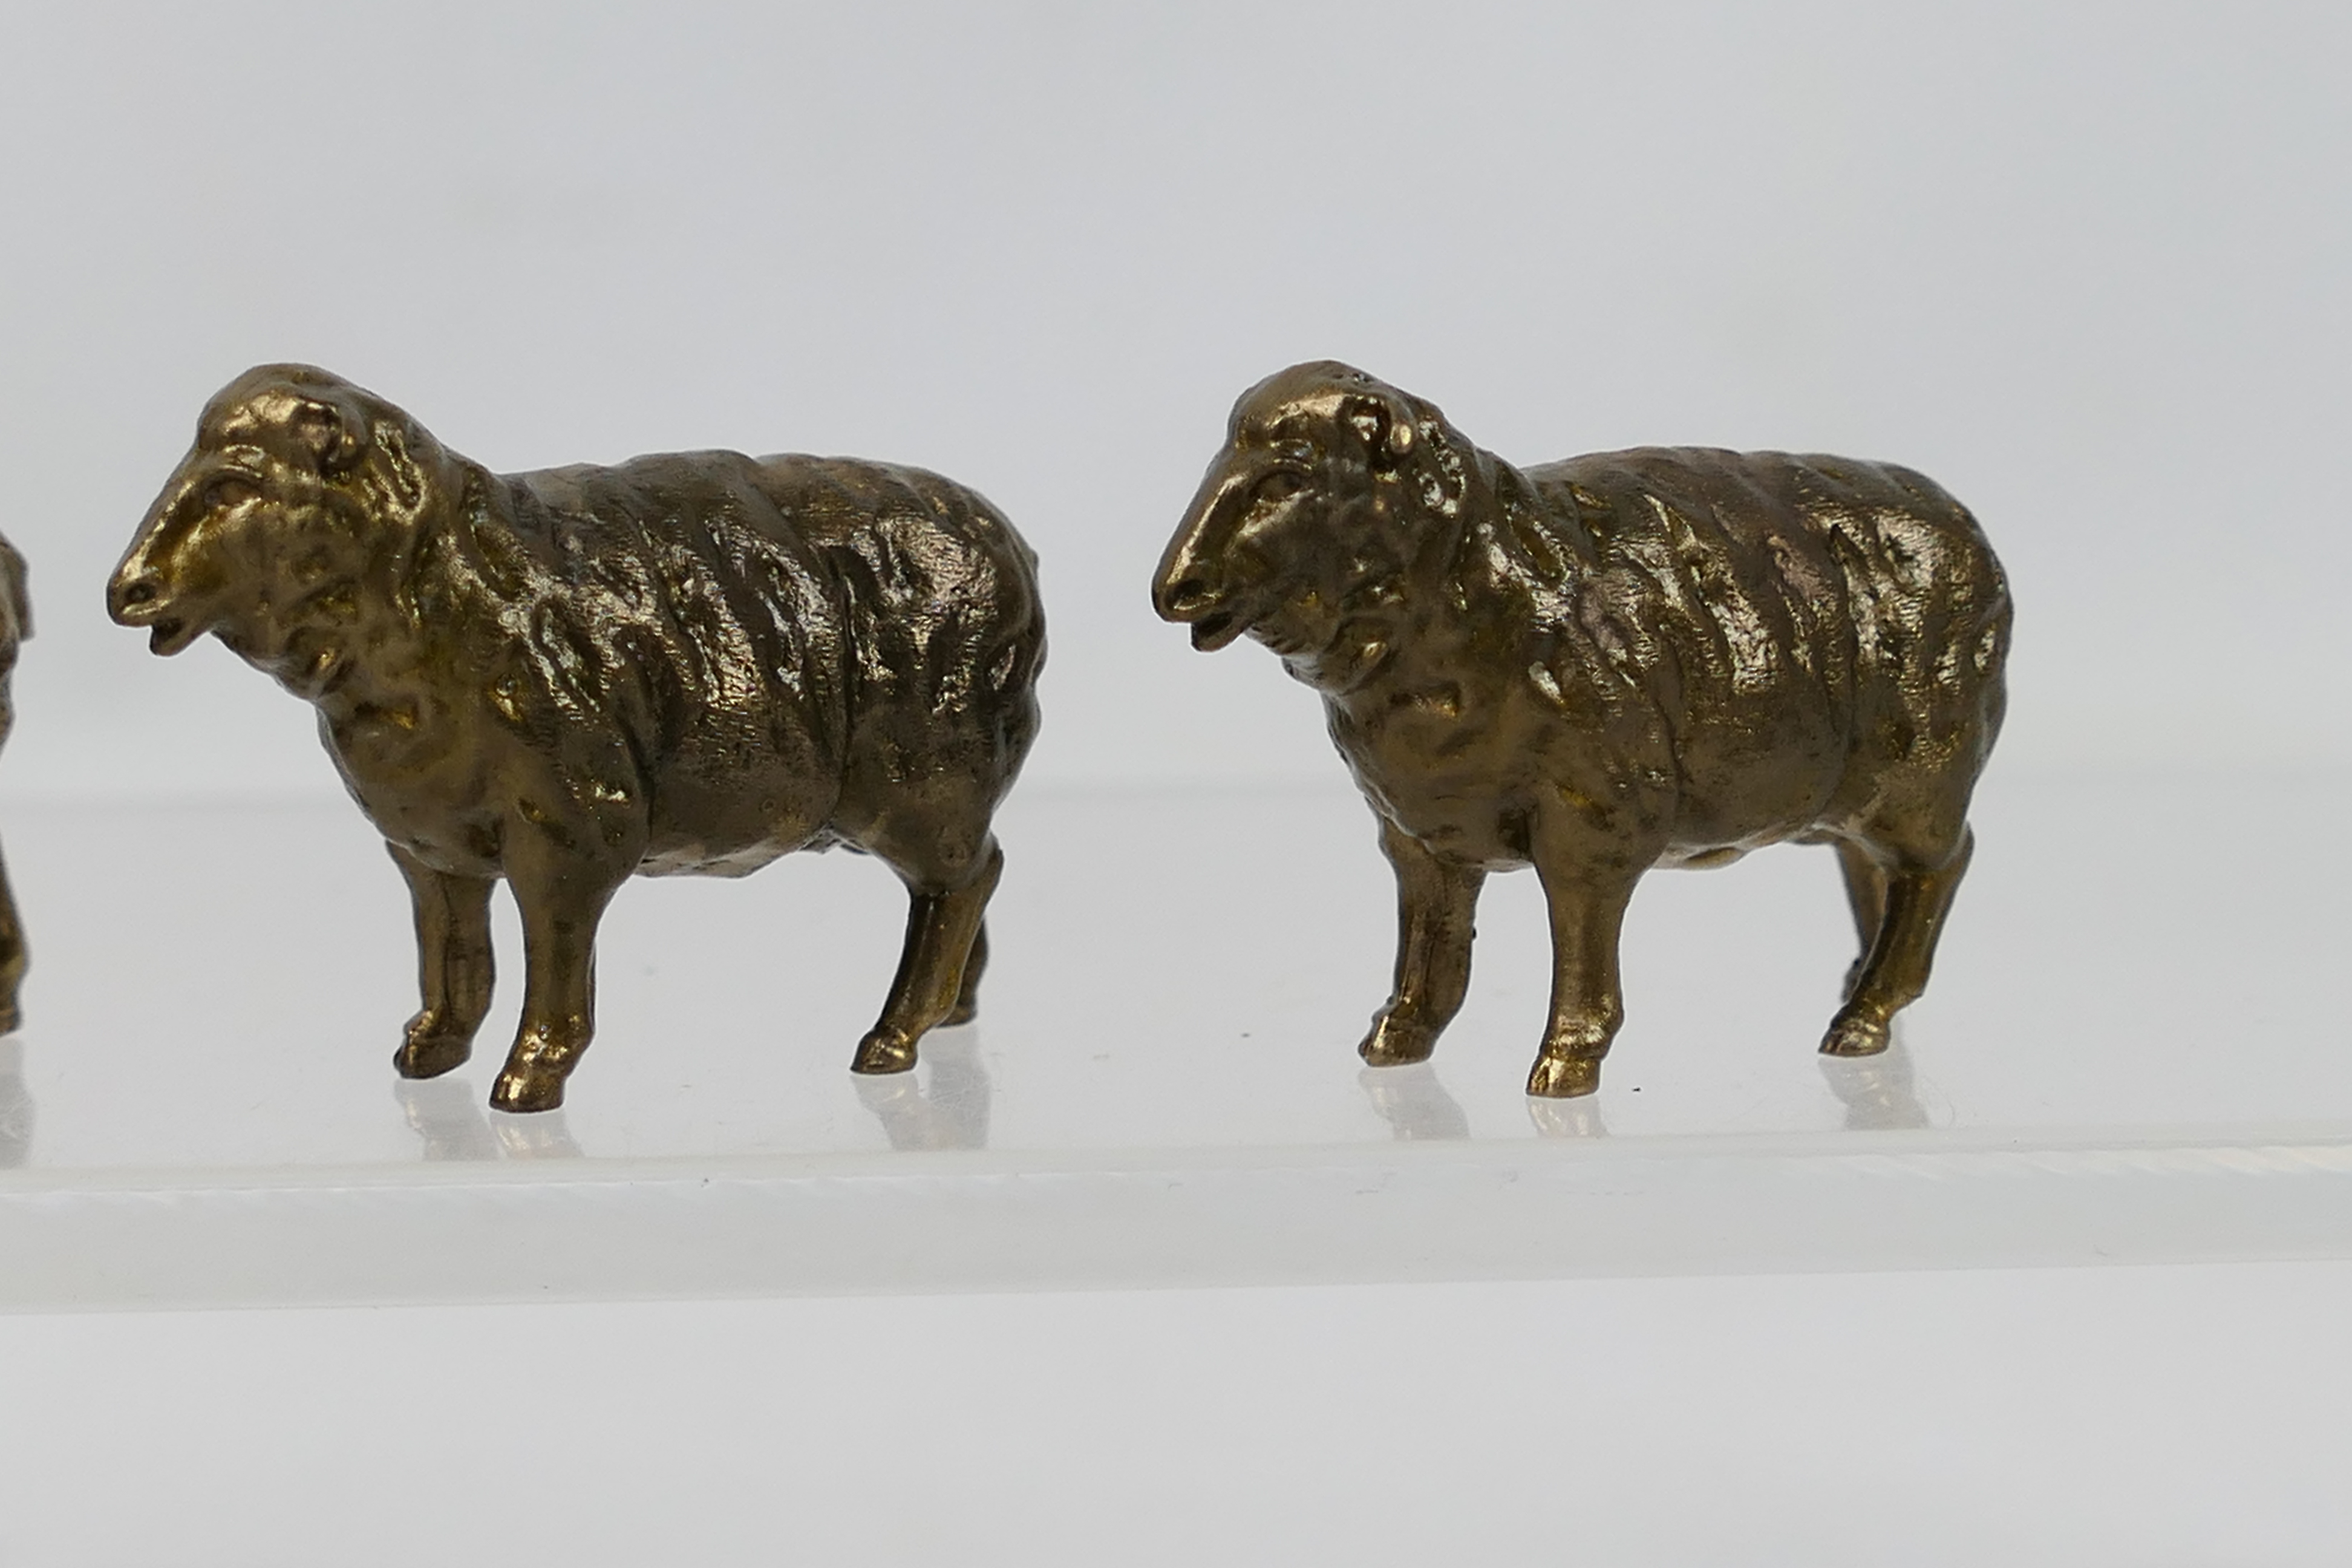 8 x bronze sheep figures. All in same si - Image 3 of 6